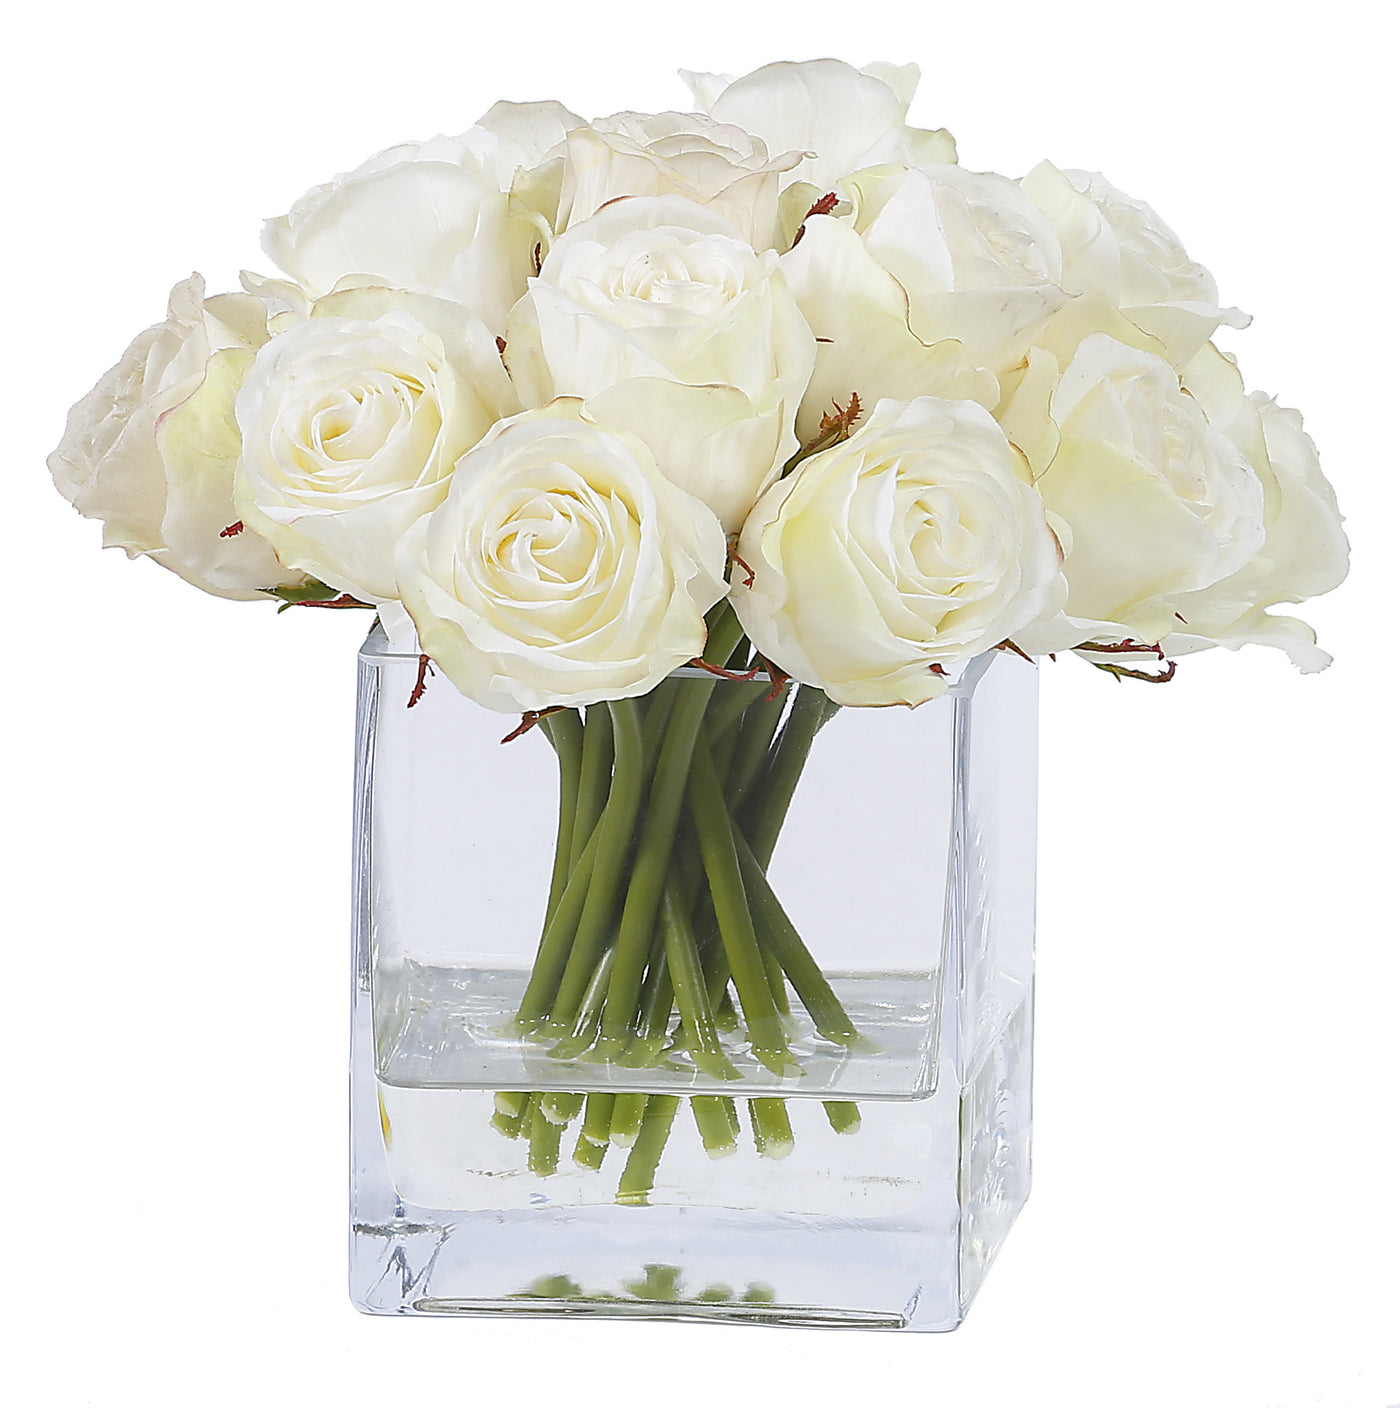 ROSE BUD IN SQUARE GLASS 8.5'' (WHI009-WH) - Winward Home silk flower arrangements